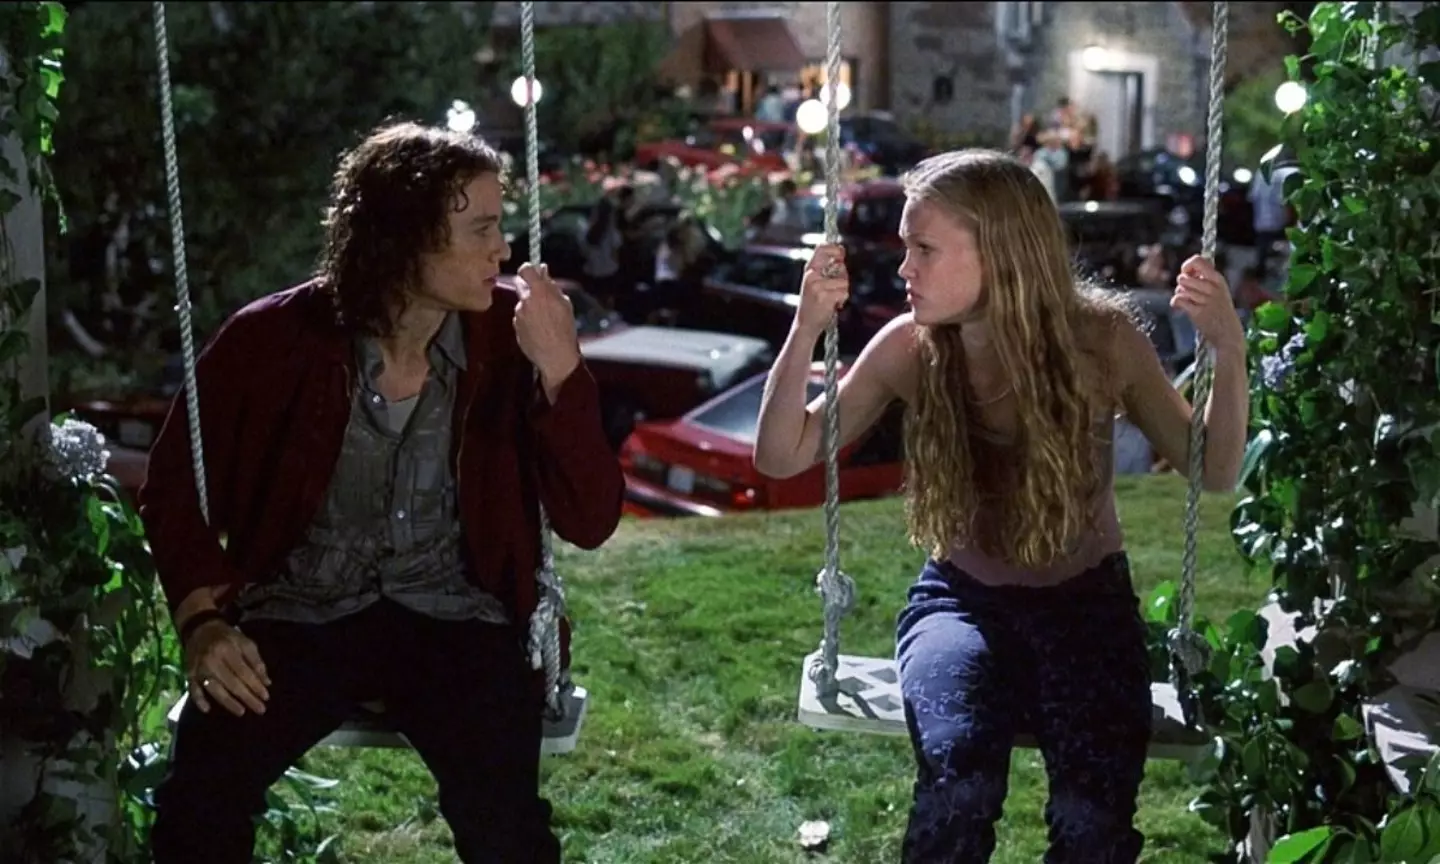 10 Things I Hate About You.